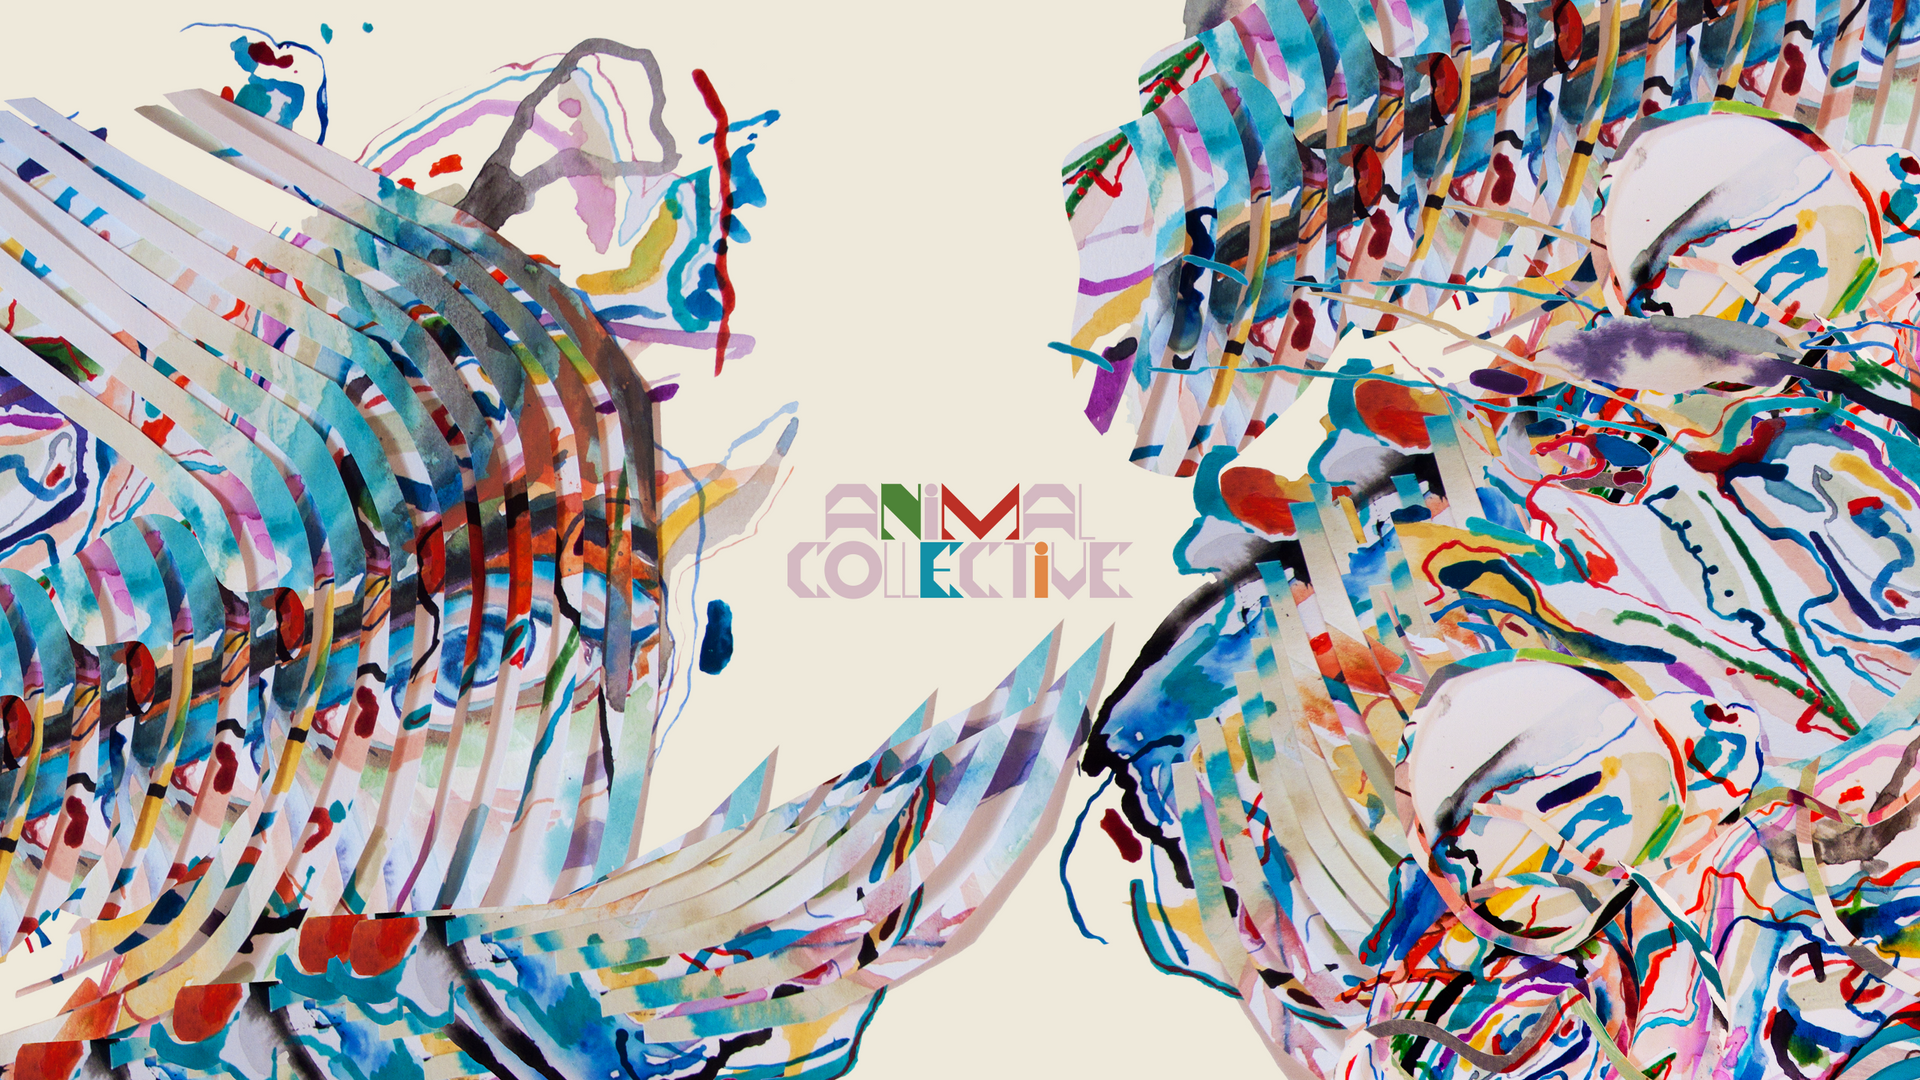 Animal Collective - Painting With